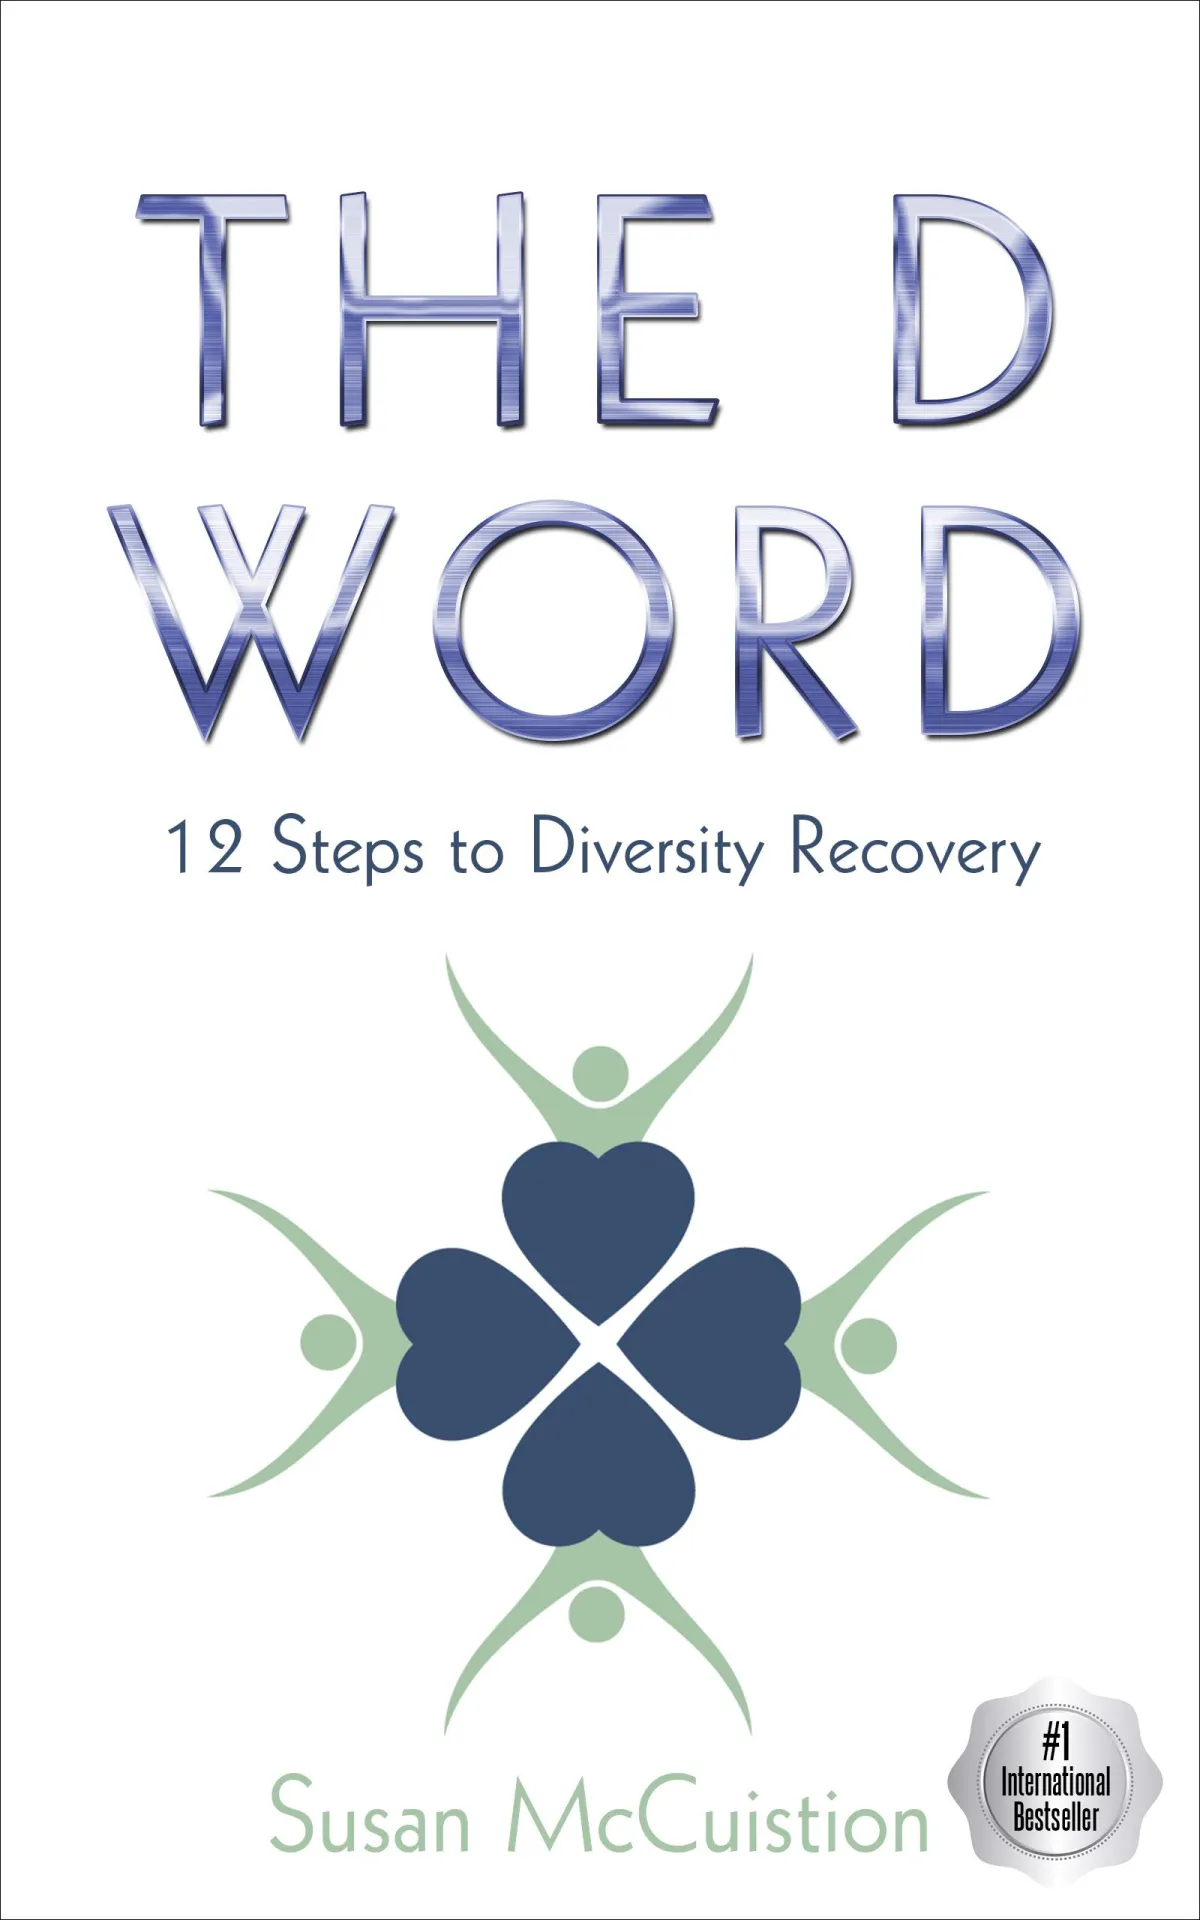 The D Word - 12 Steps to Diversity Recovery by Susan McCuistion _ Spotlight Publishing House